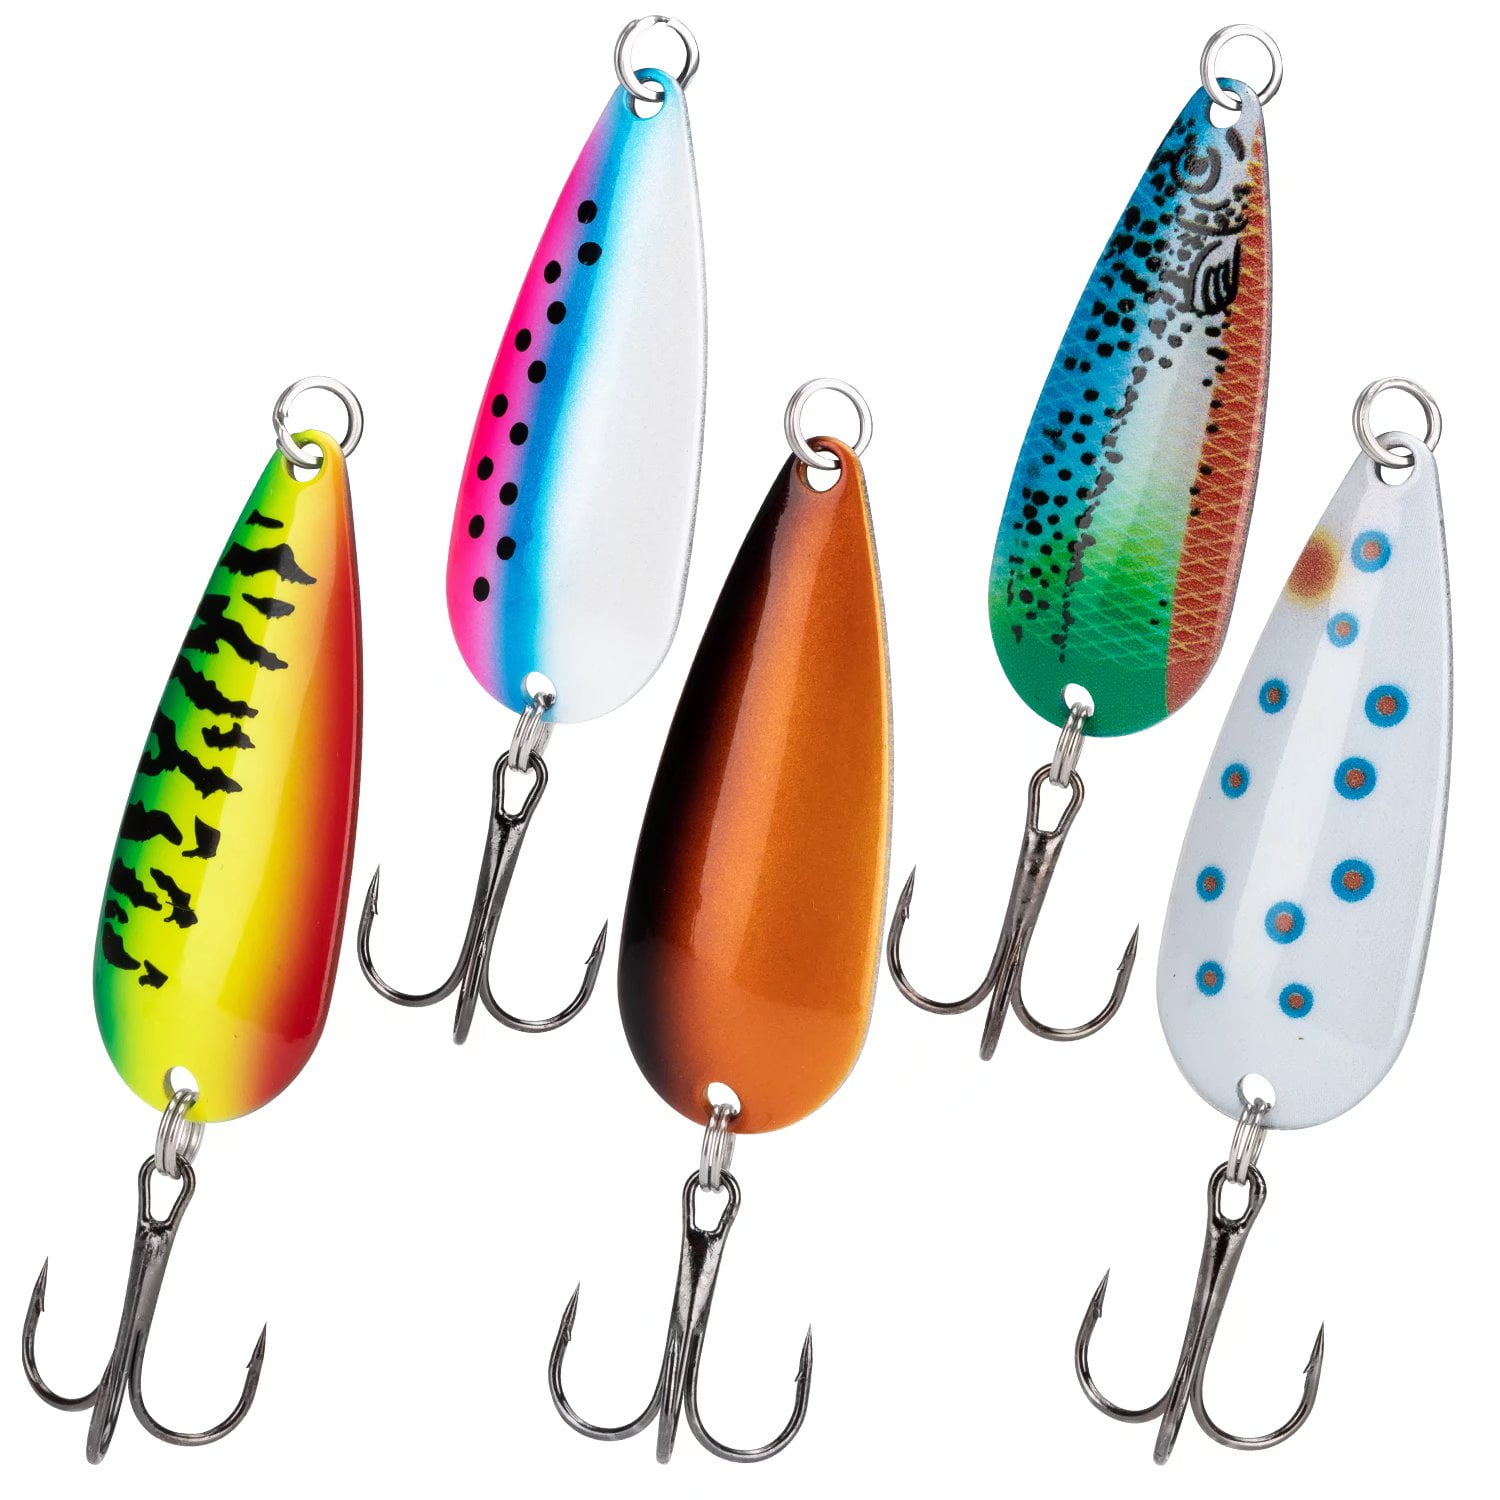 10pcs Metal Casting Spoon Fishing Lure Jig with Treble Hooks Glow Hard Metal Spinner for Saltwater Freshwater Trout Pike Bass Crappie Walleye Fishing Spoon Lures Bass Baits Set